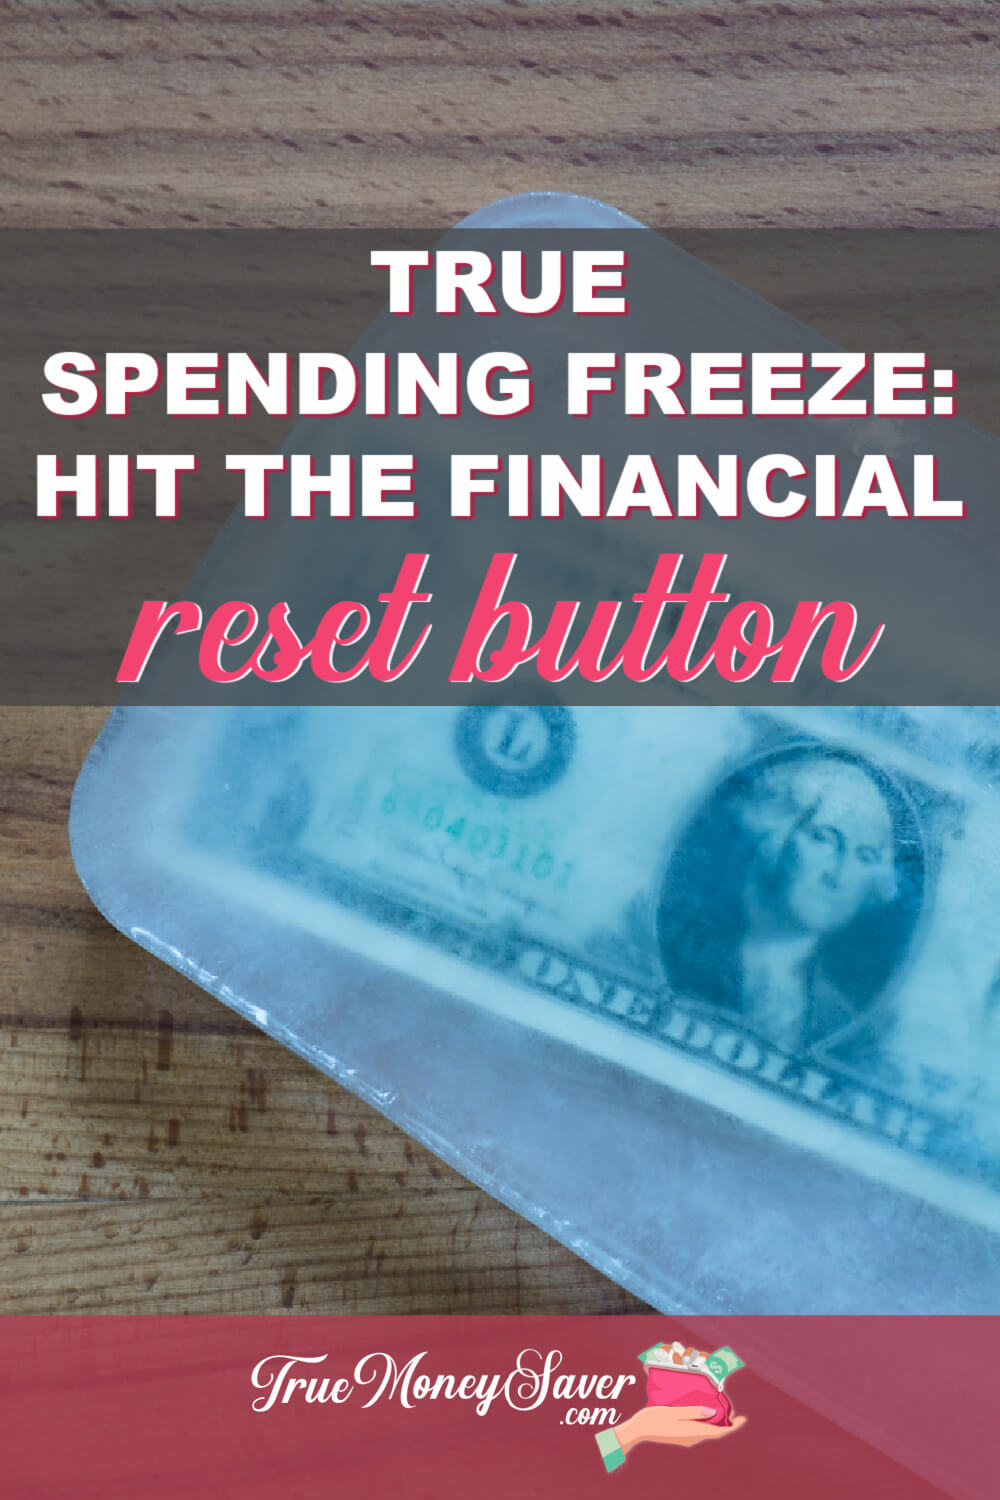 Reset Your Finances During This Month And Potentially Save $1,000 With The True Spending Freeze Challenge!